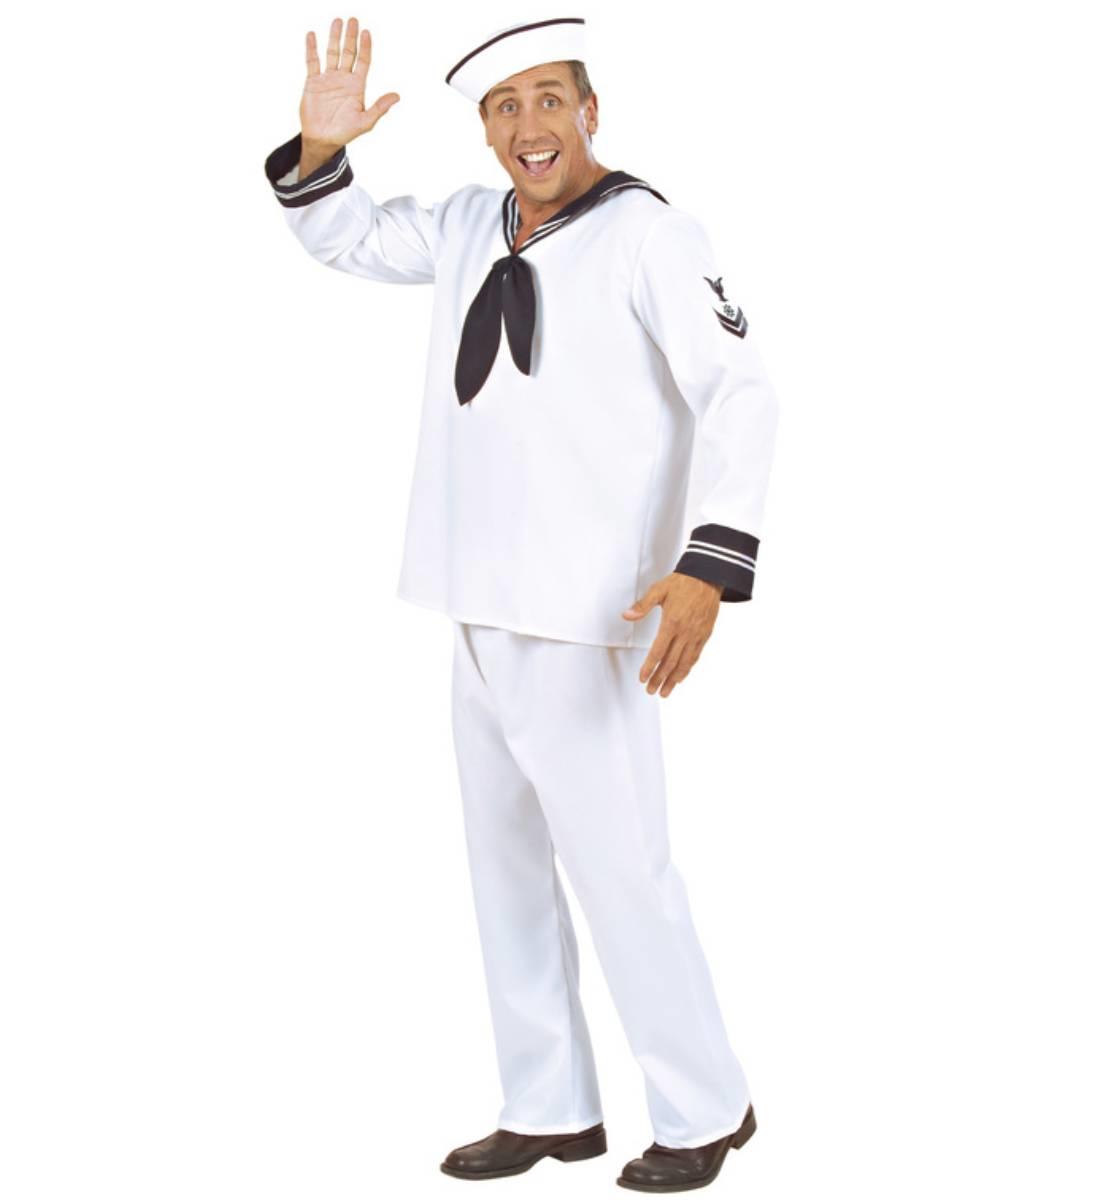 Adult traditional naval sailor costume in white by Widmann 5772S available here at Karnival Costumes online party shop